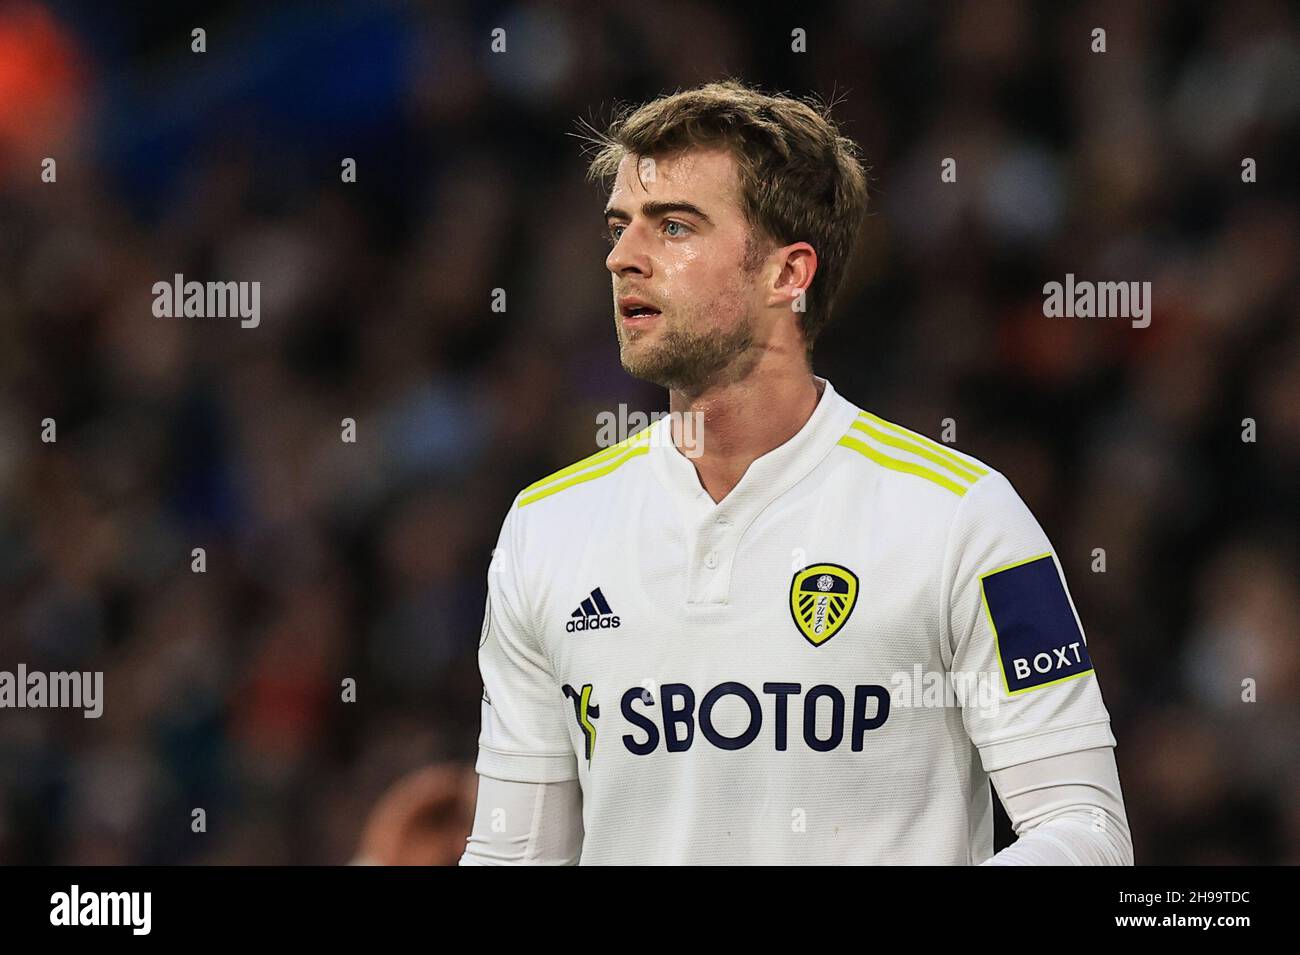 Patrick Bamford #9 of Leeds United during the game Stock Photo